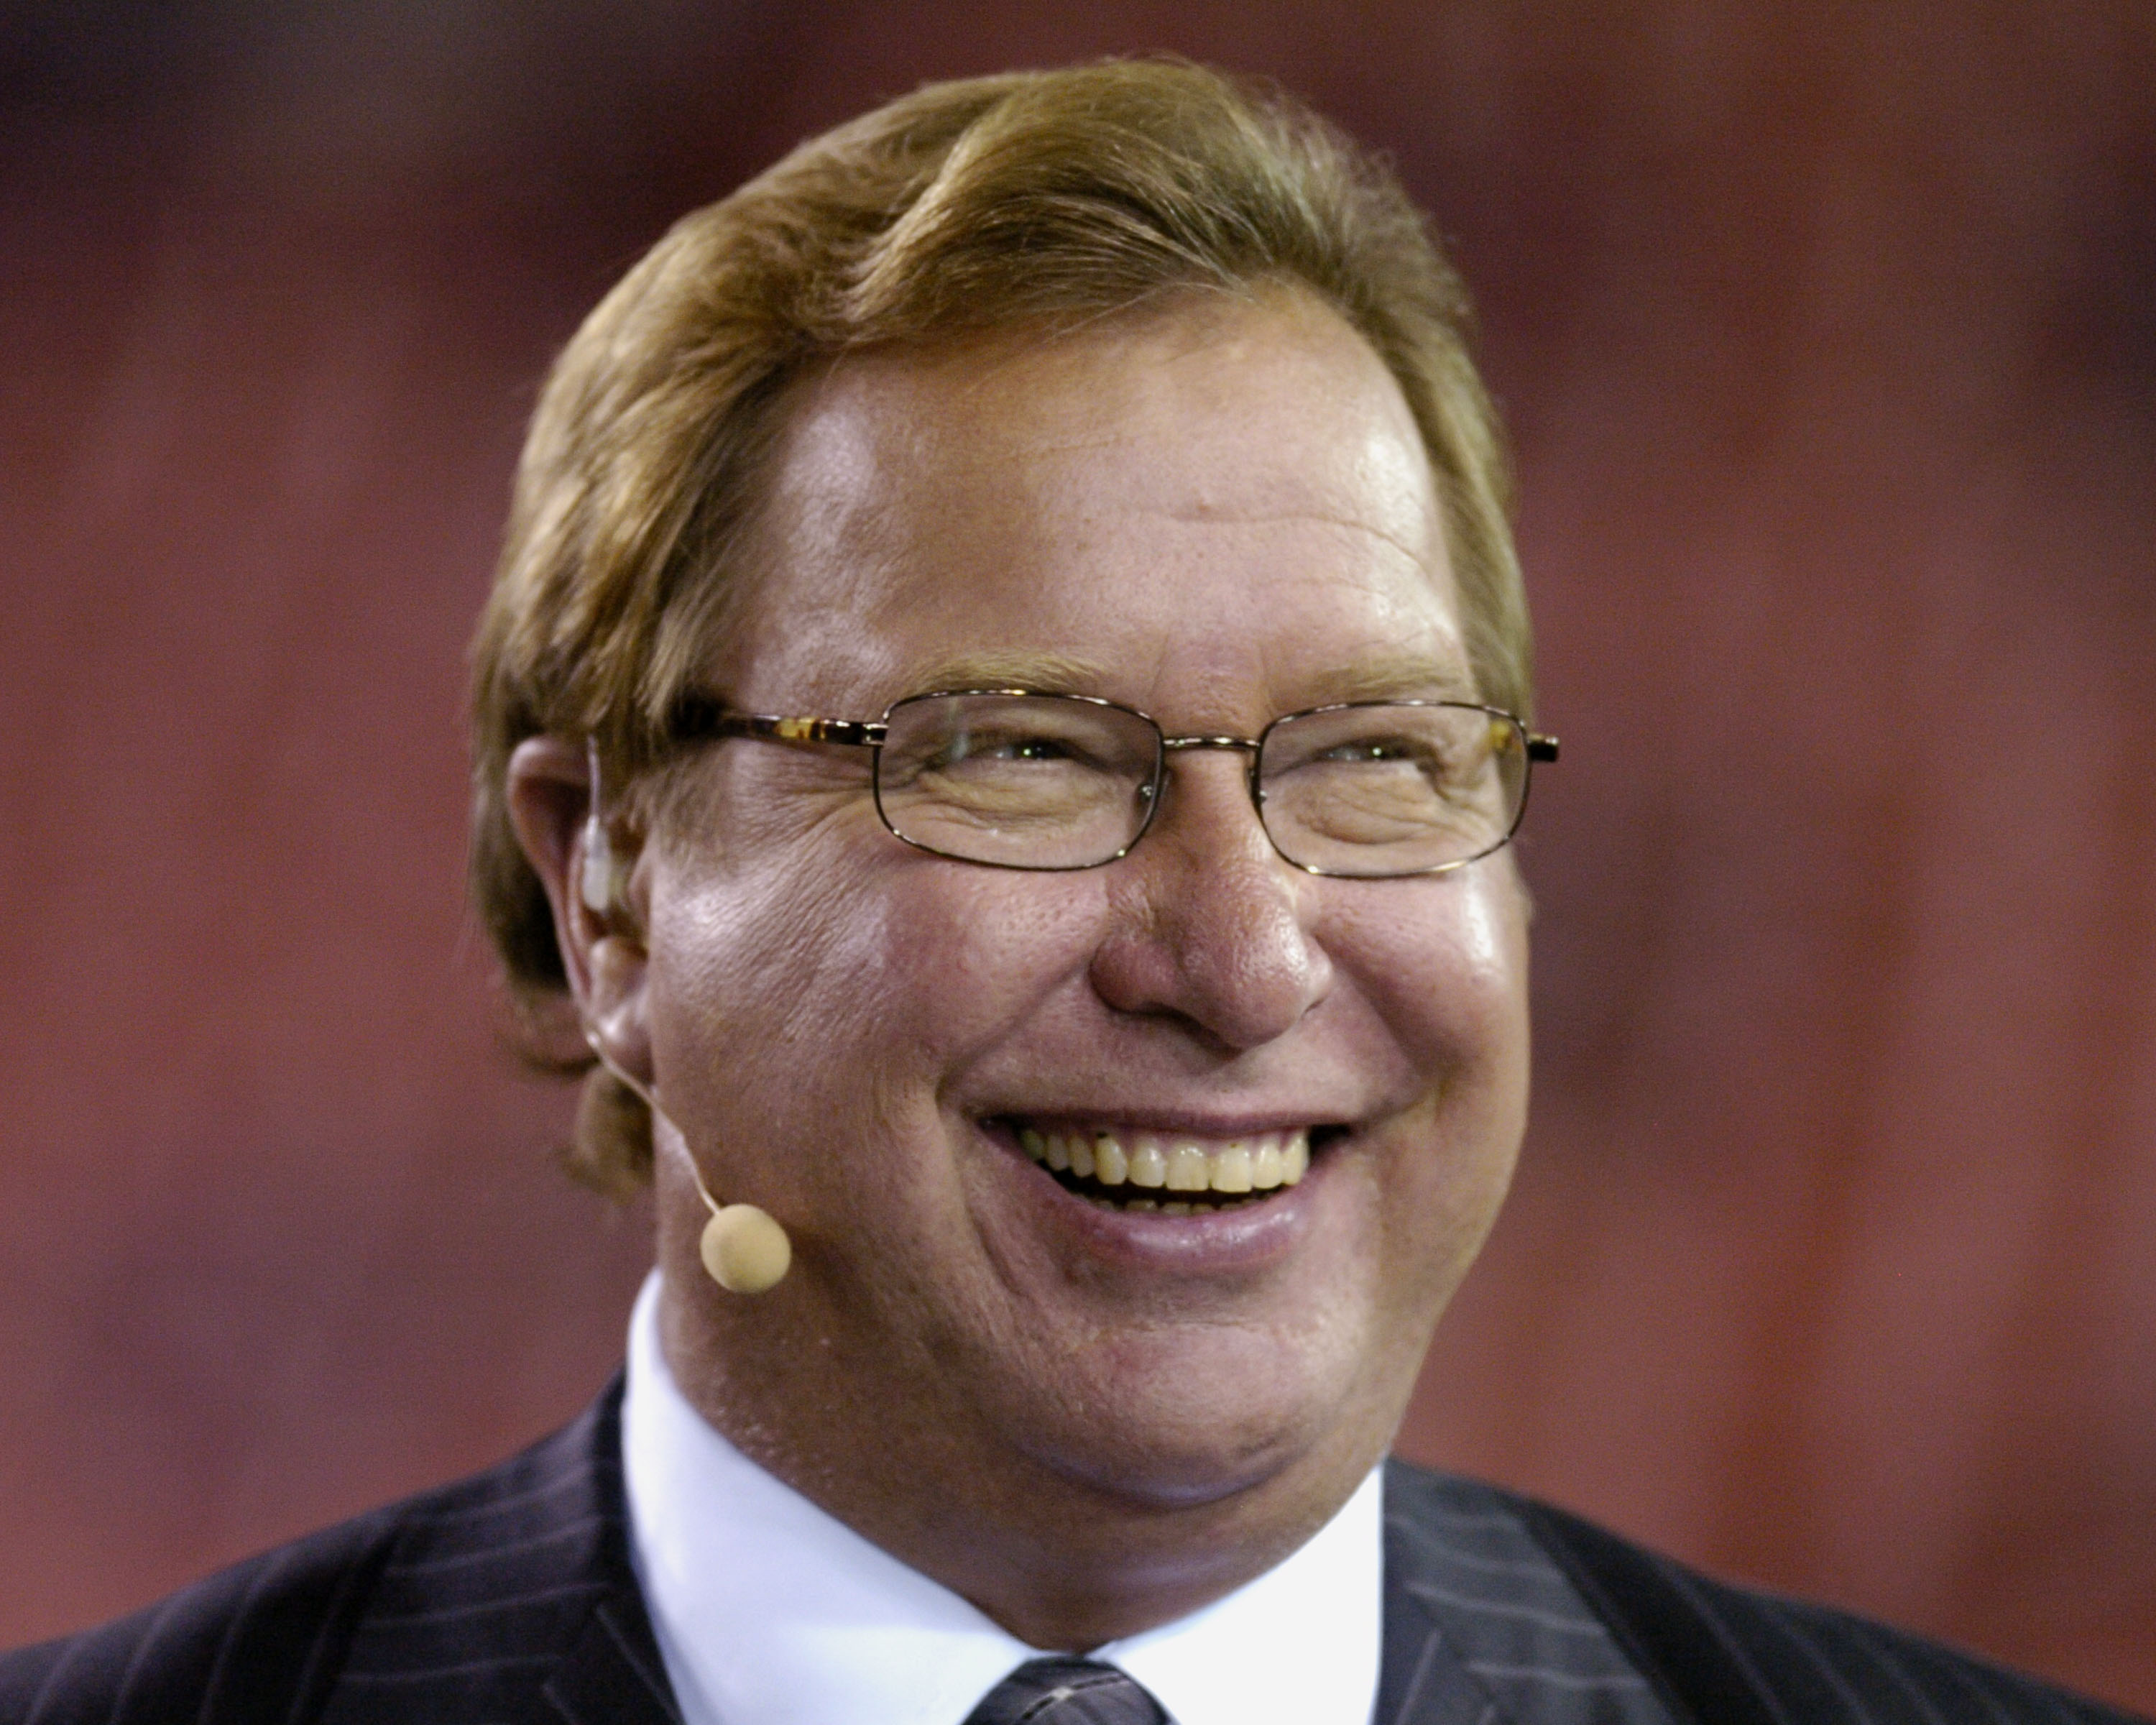 ESPN commentator Ron Jaworski  works the Dallas Cowboys  -   Washington Redskins  game  at FedEx Field, September 27, 2004 in Landover, Maryland. The Cowboys defeated the Redskins 21 to 18.  (Photo by Al Messerschmidt/Getty Images)